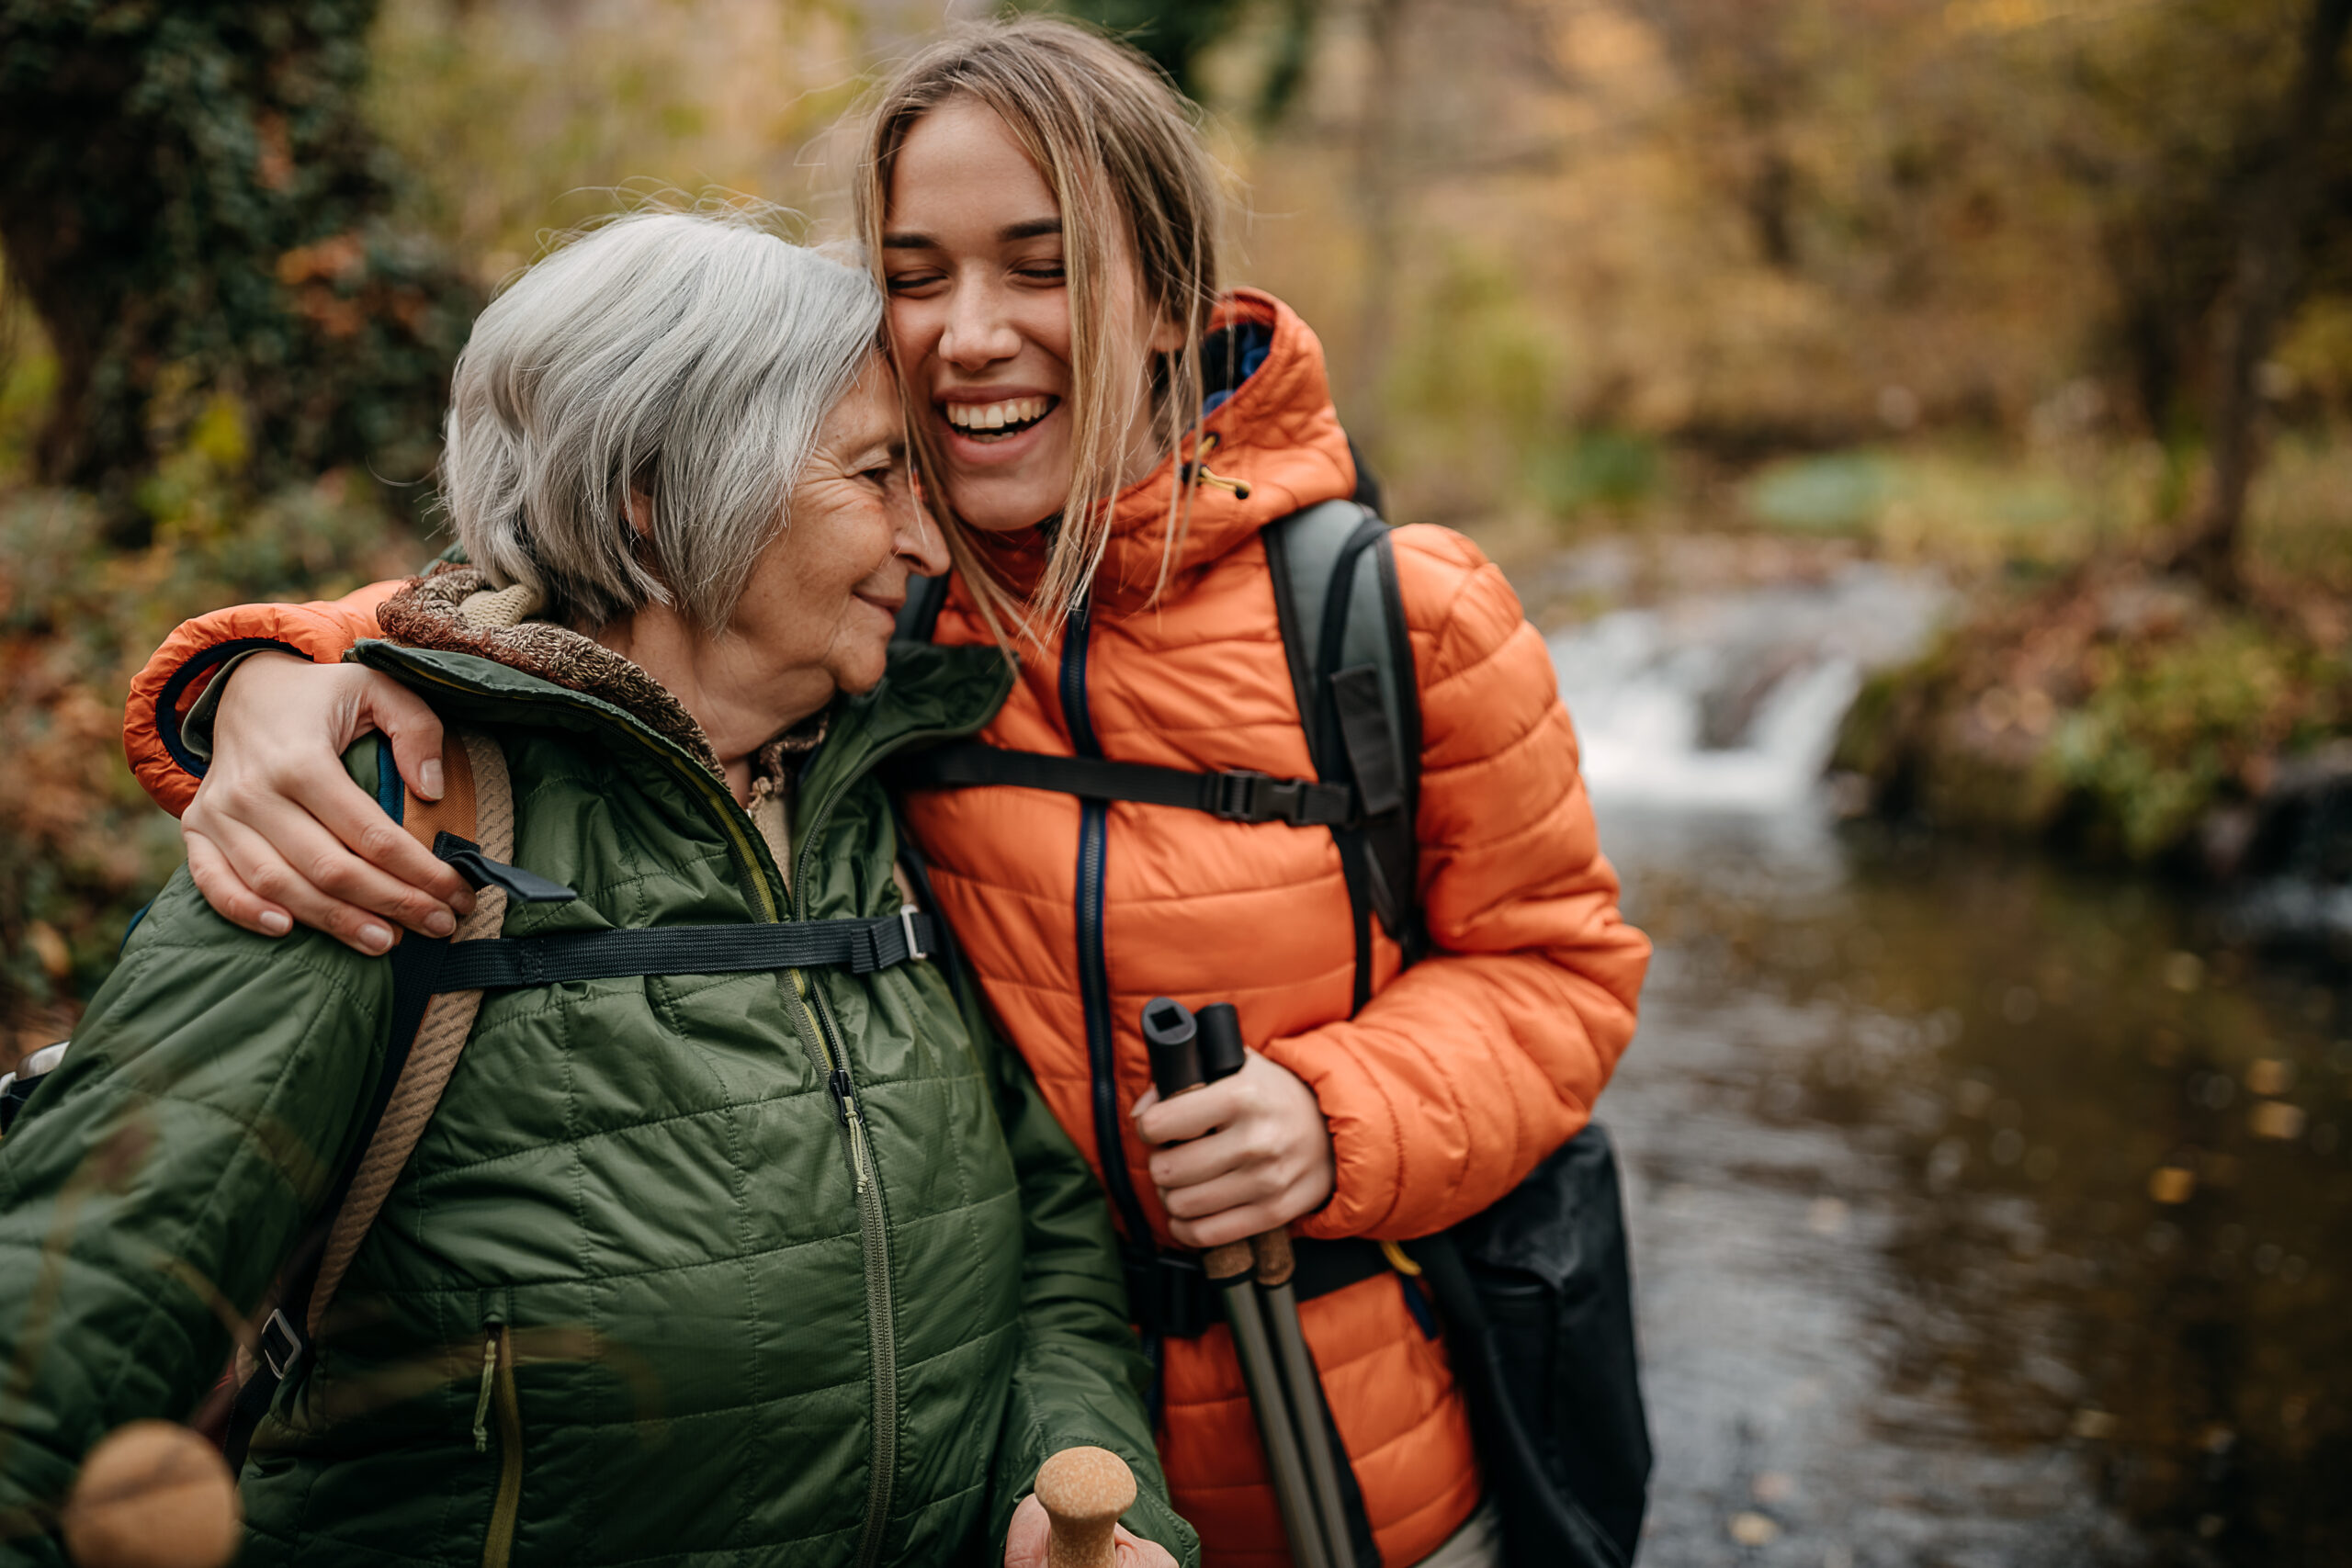 Photograph of an older woman and younger woman hugging while hiking in the woods.